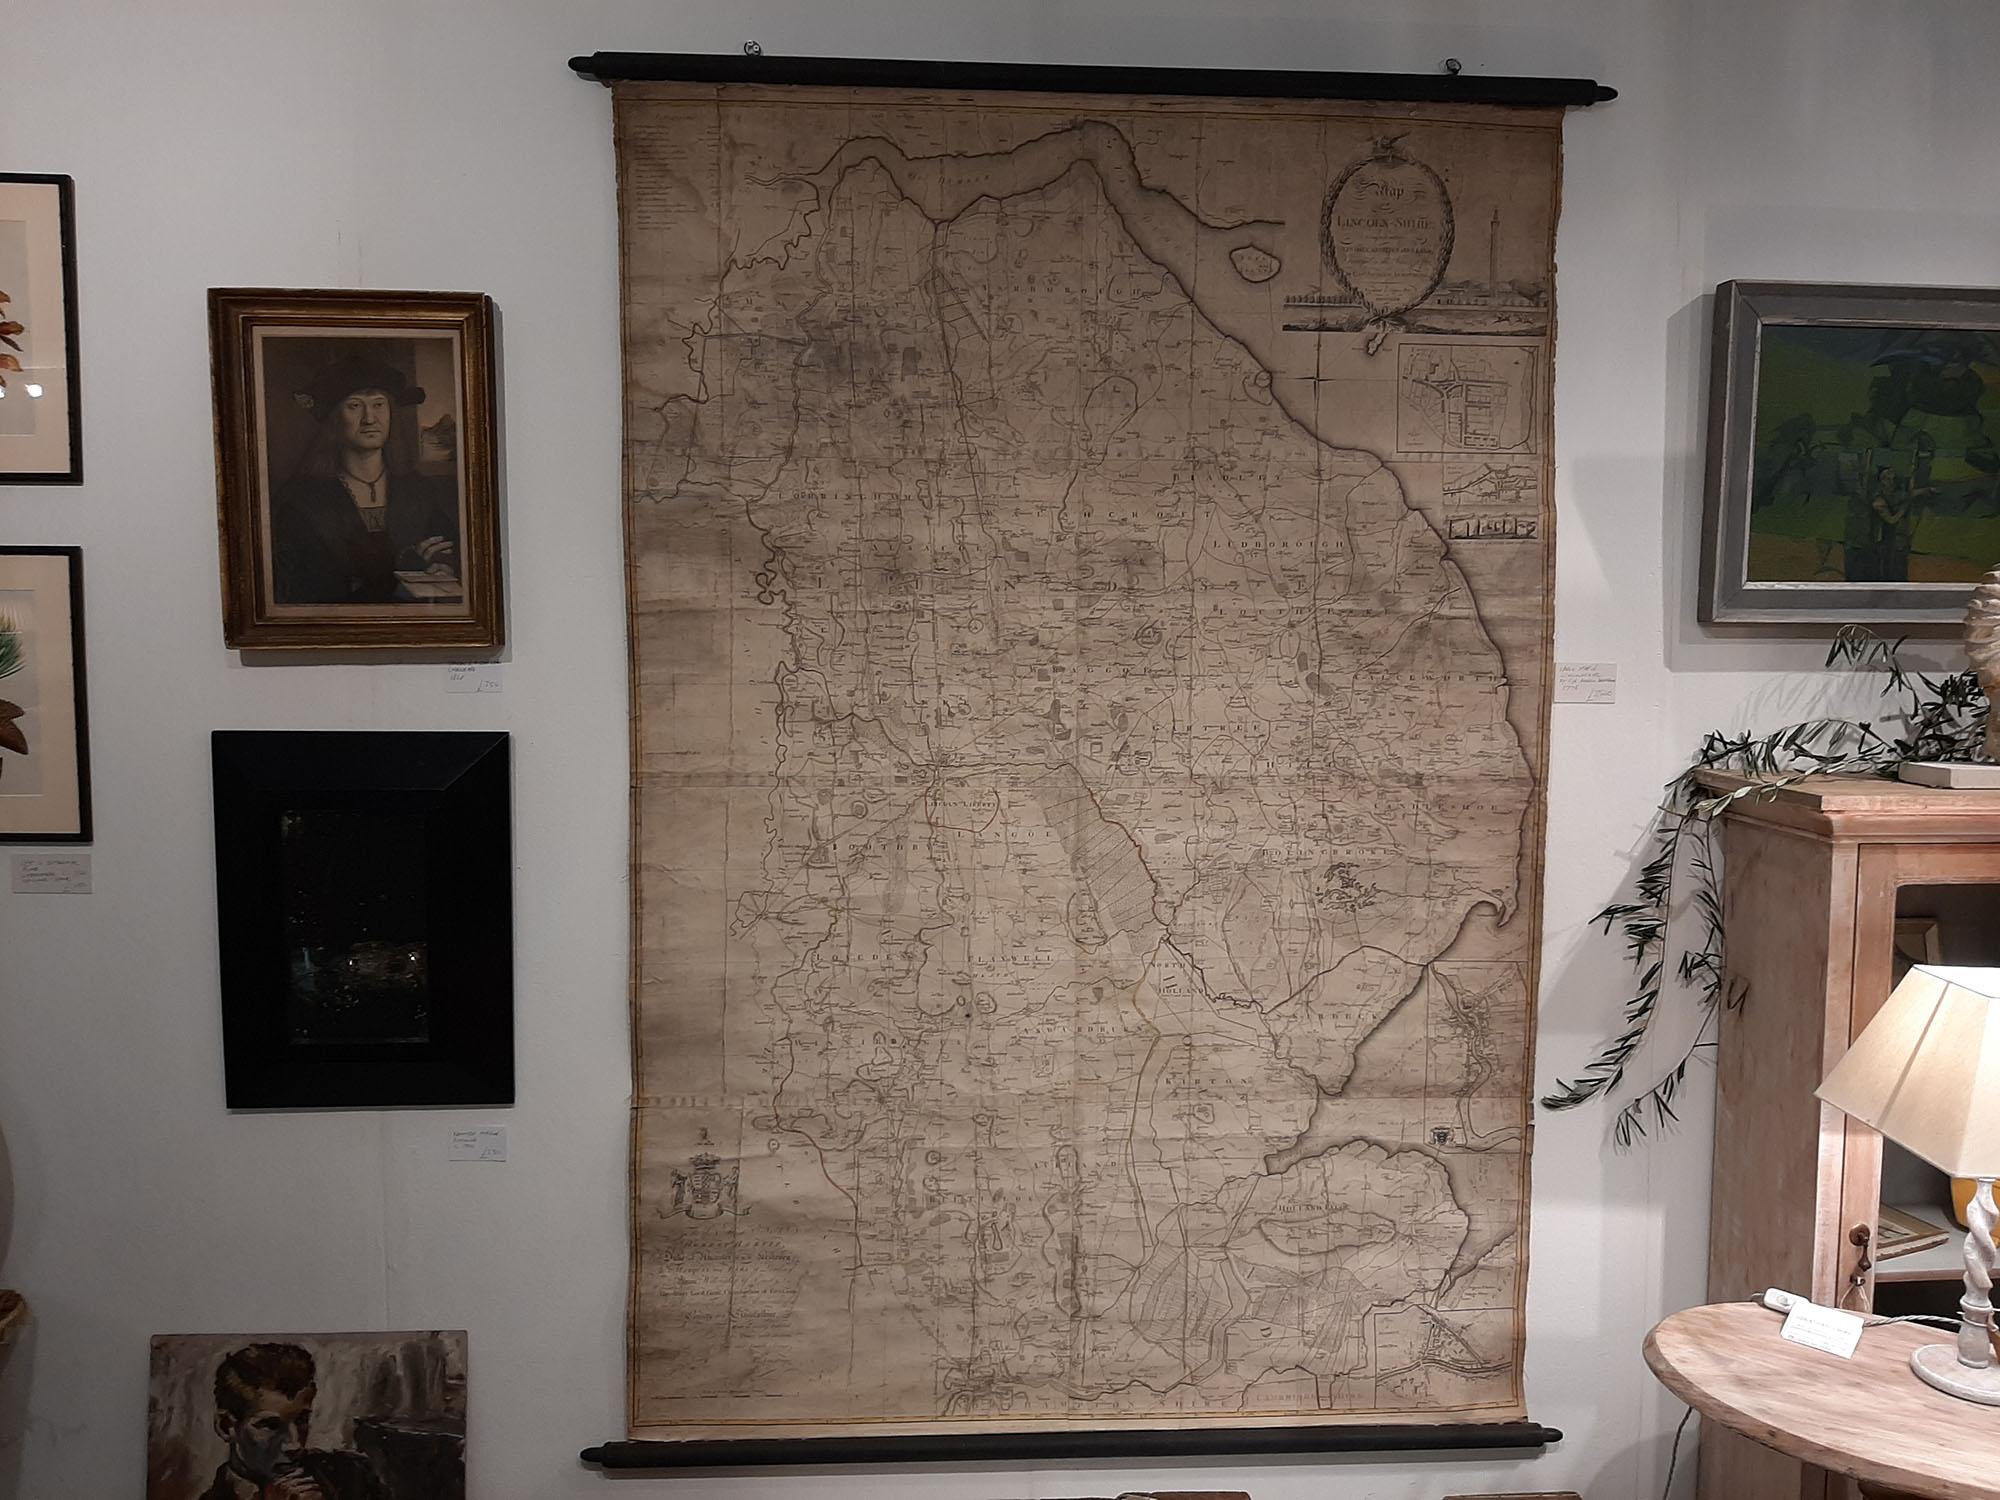 Wonderful scroll map of Lincolnshire

By Captain Armstrong, 1778

Copper plate engraving on paper laid on canvas

Original ebonized wood frame with lovely turned finials

The map can be rolled up for easy transport

There are signs of